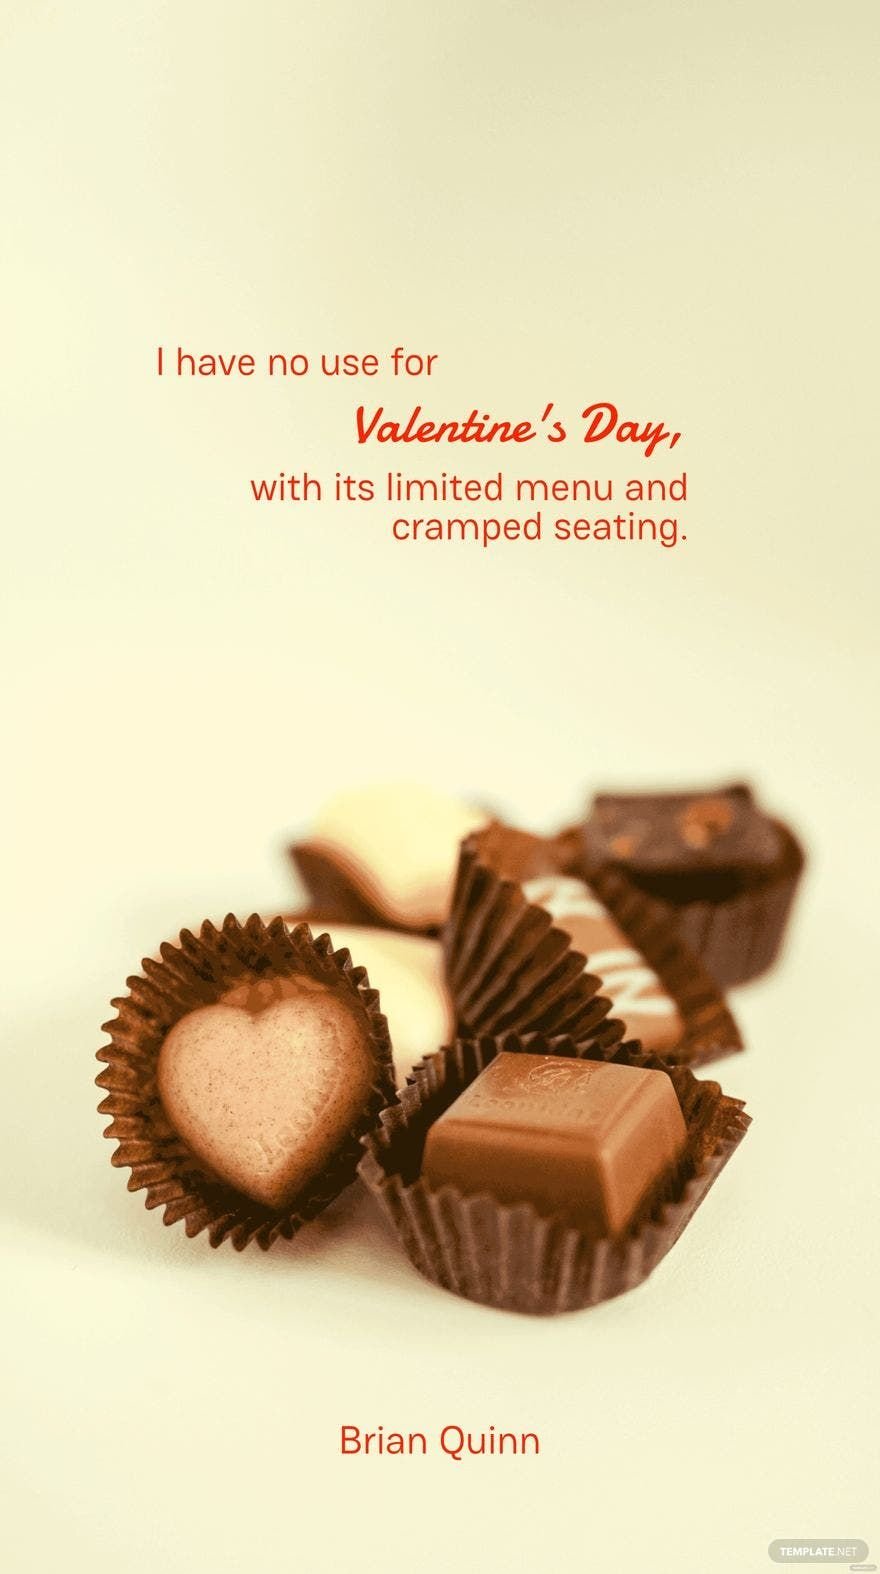 Brian Quinn - I have no use for Valentine's Day, with its limited menu and cramped seating.